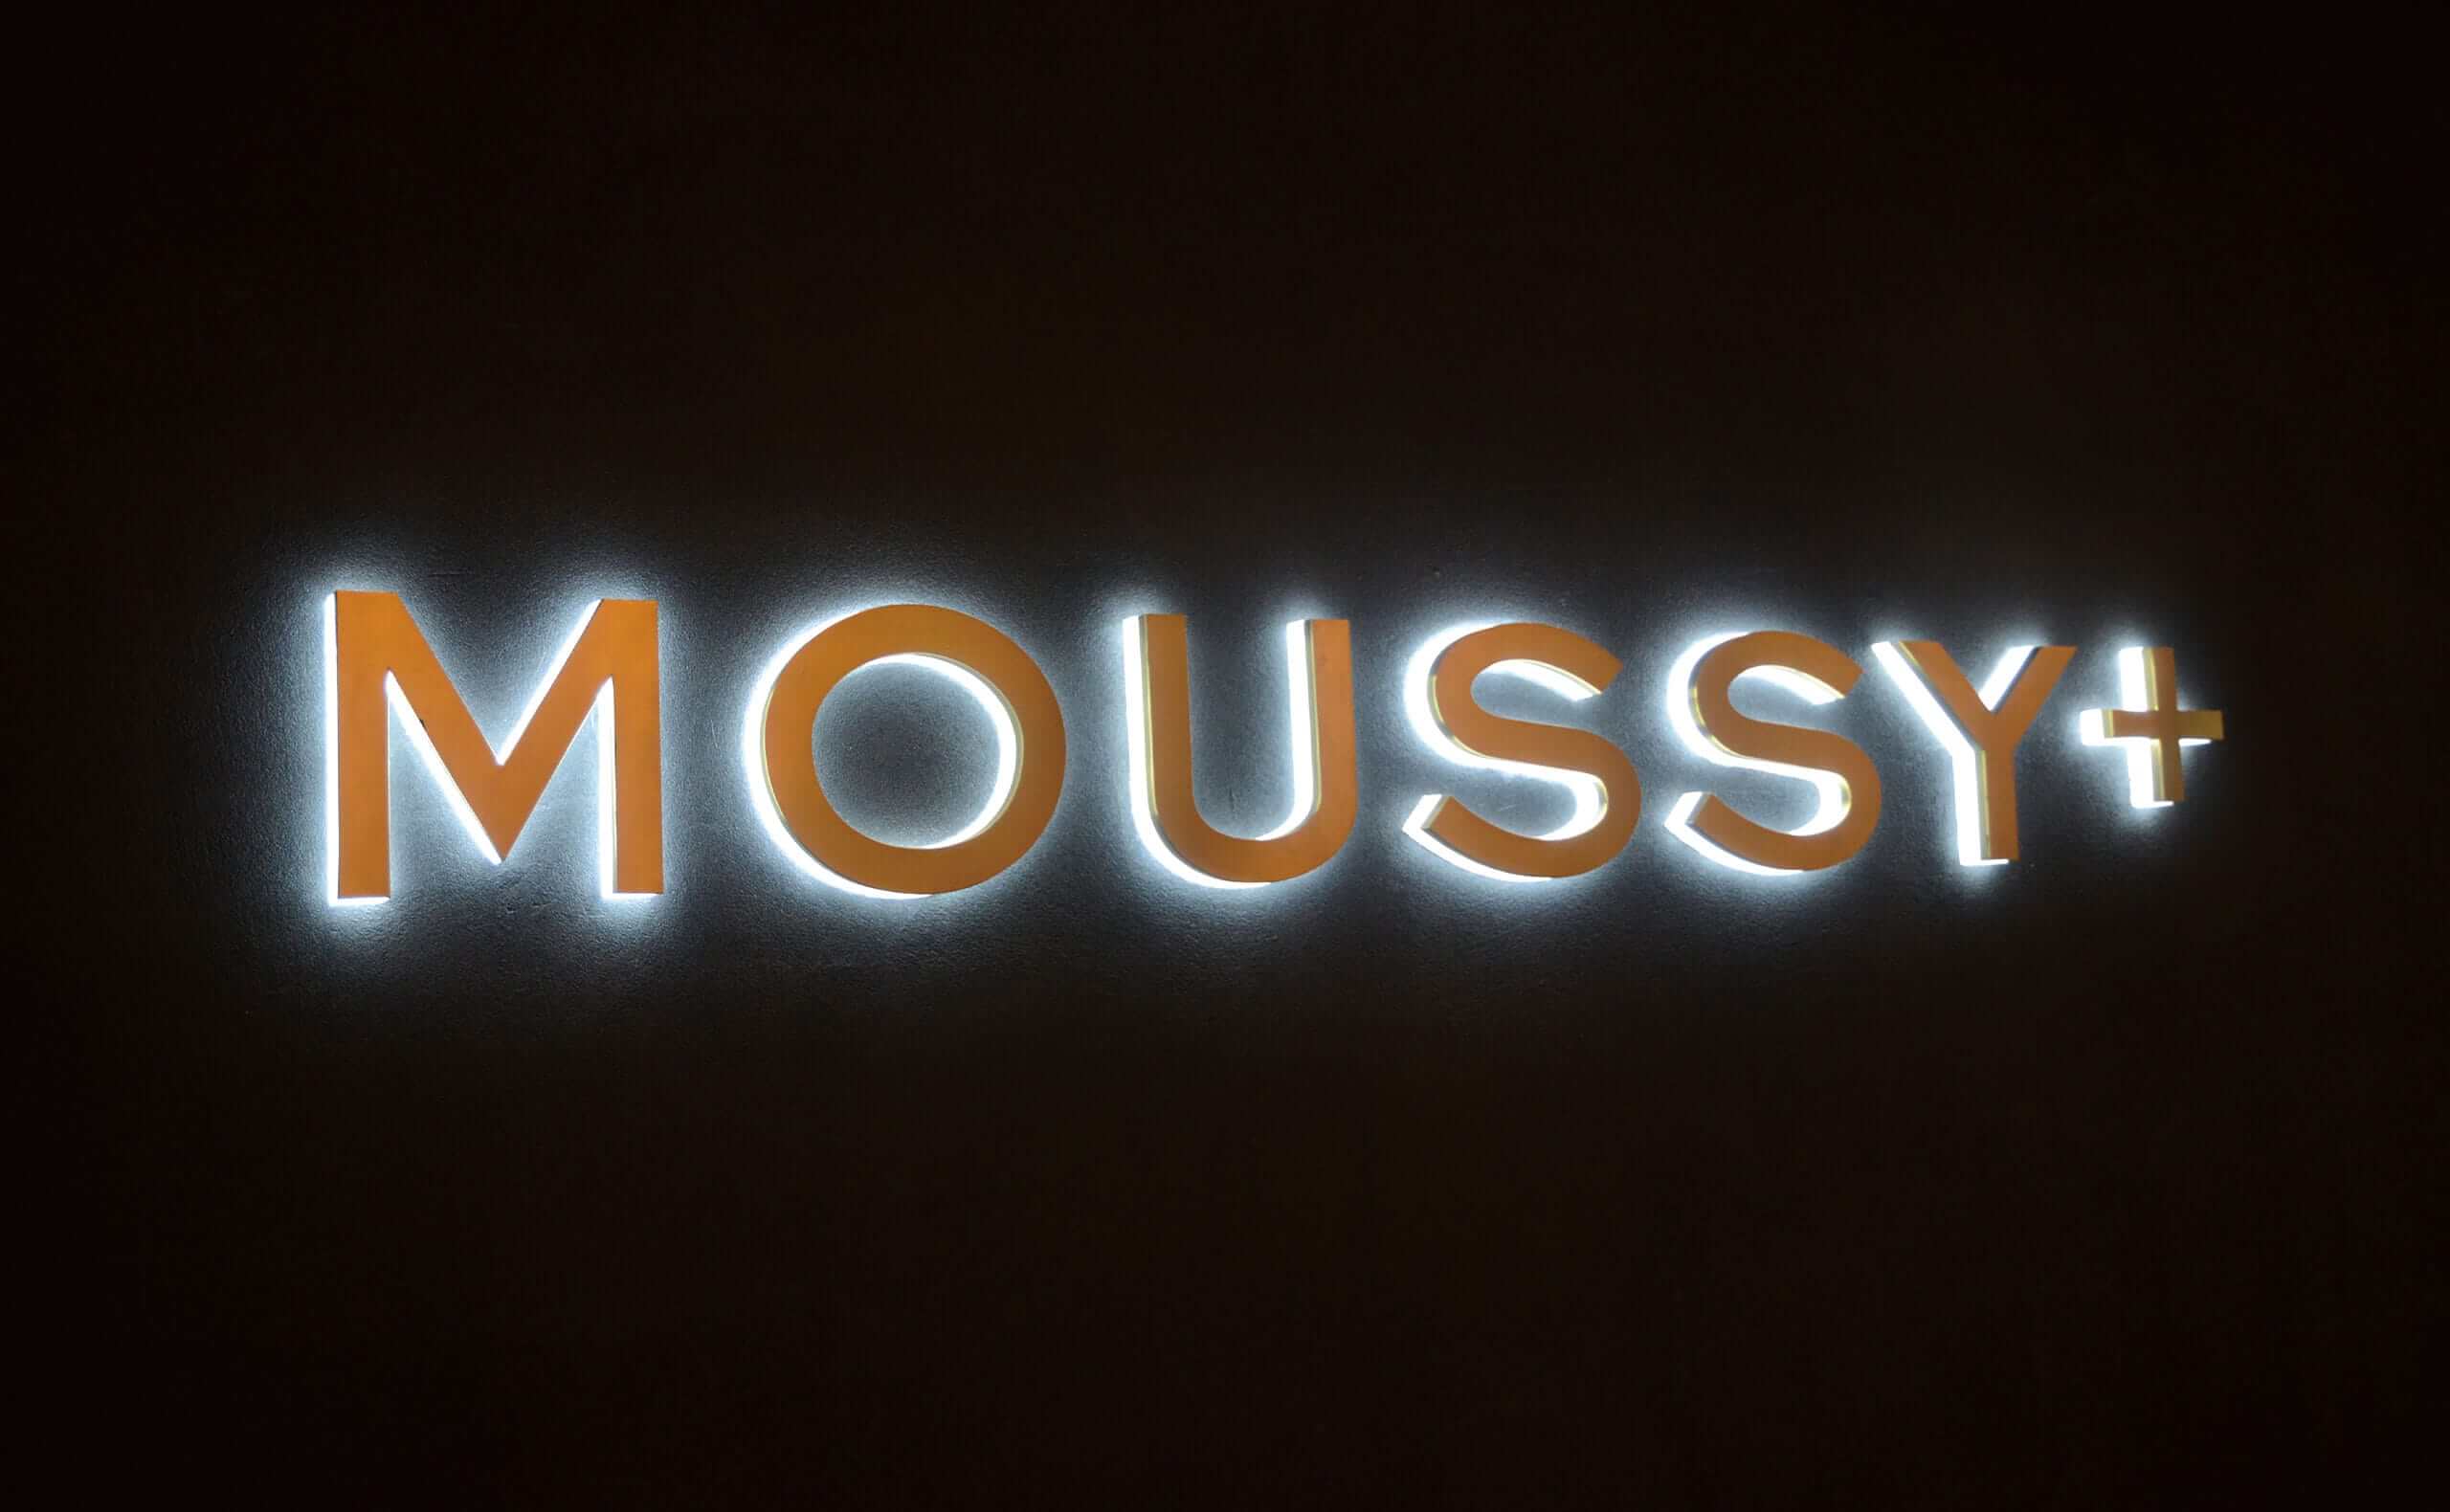 Side Lit Channel Letters With Metal Front Surface For Moussy Plus